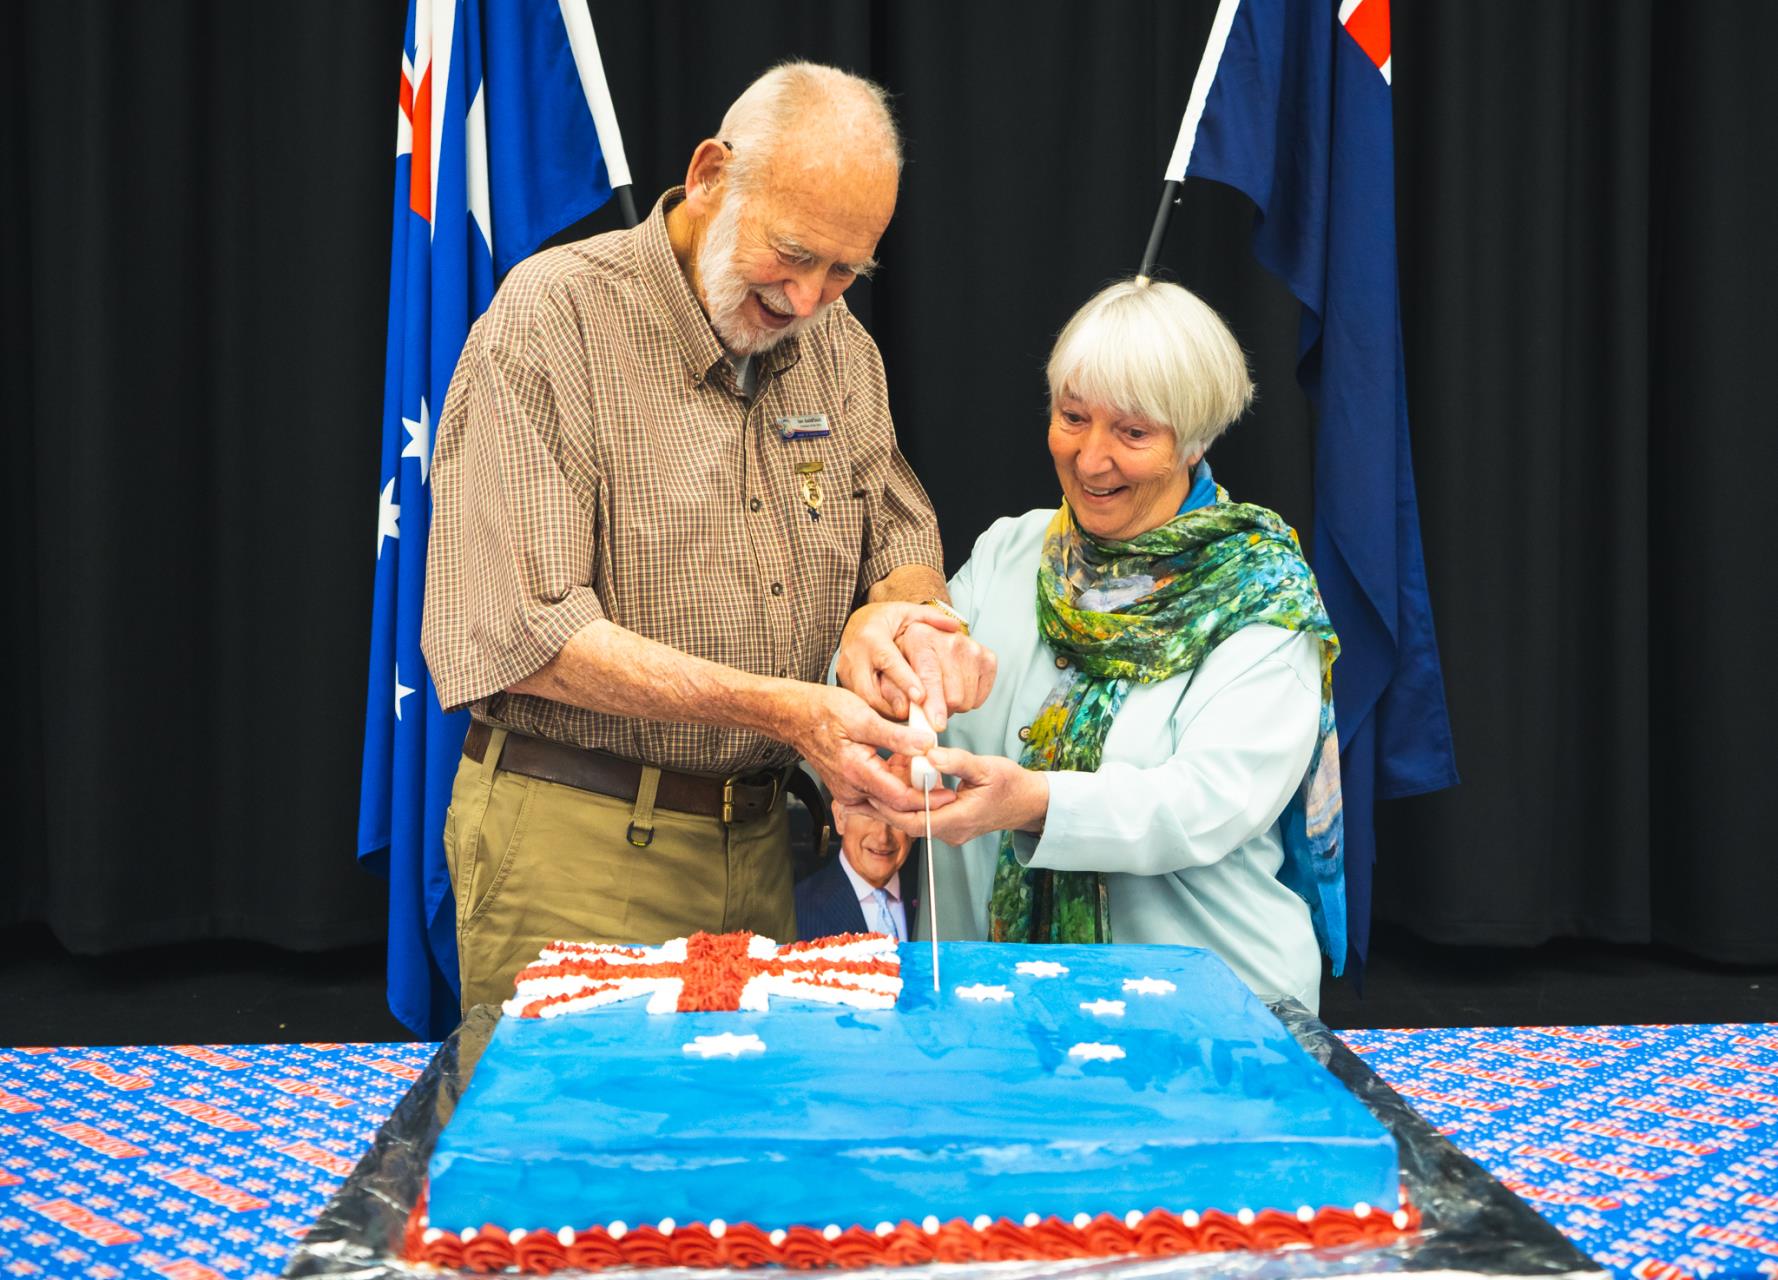 Ian and Chenda Goldfinch recognised in Australia Day honours